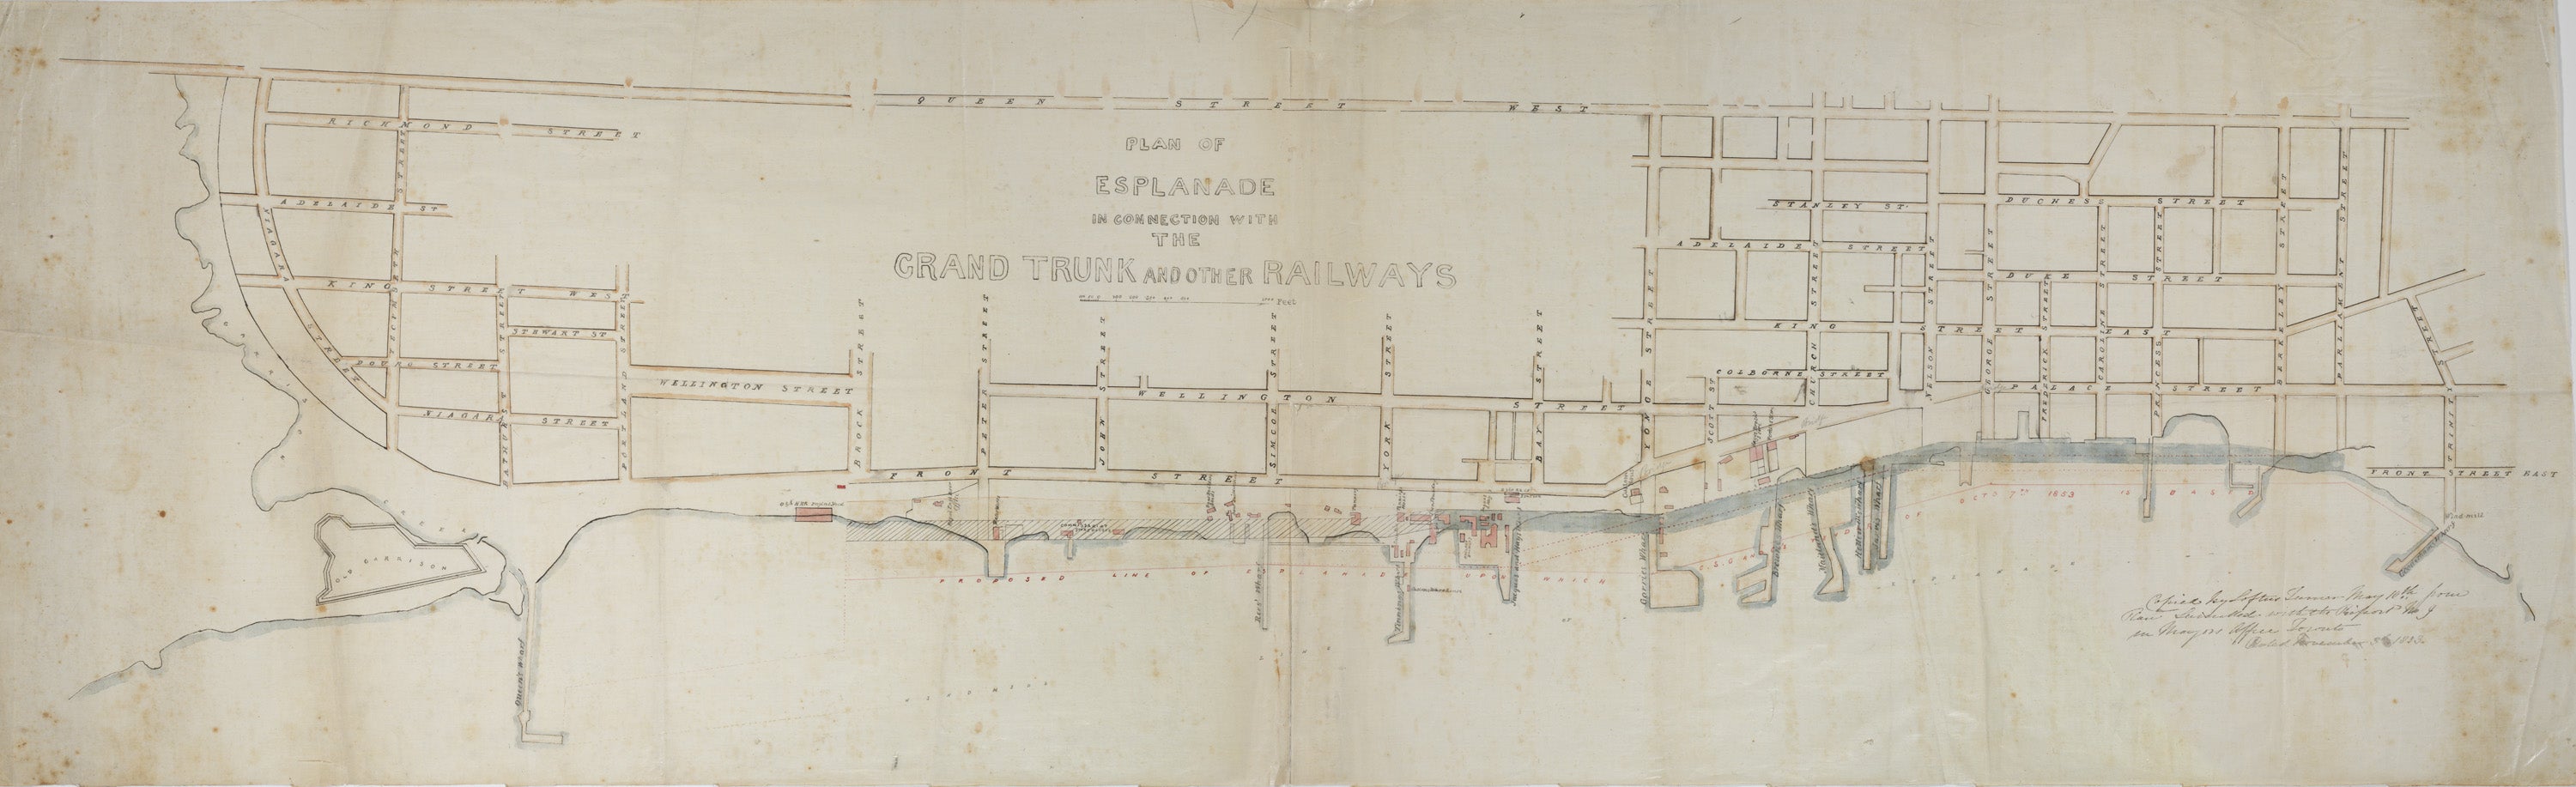 archived map of the railway lands